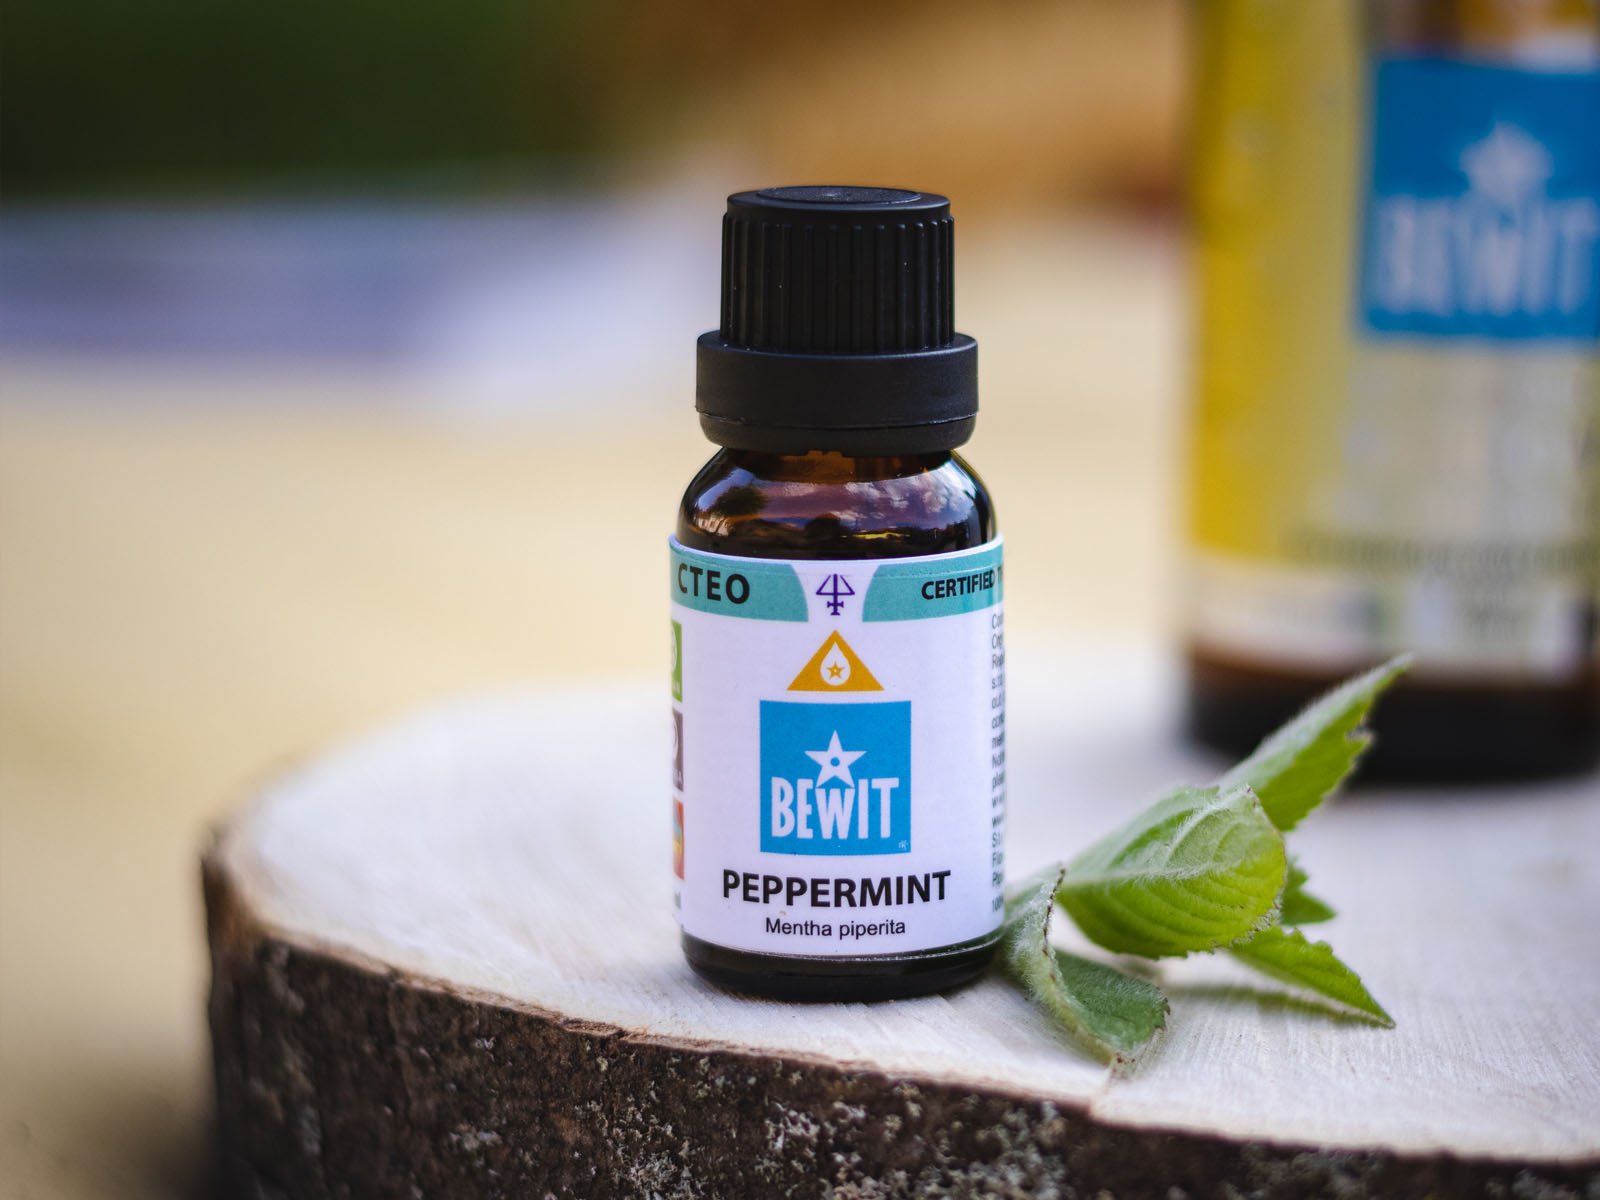 BEWIT Peppermint - 100% pure and natural CTEO® essential oil - 7